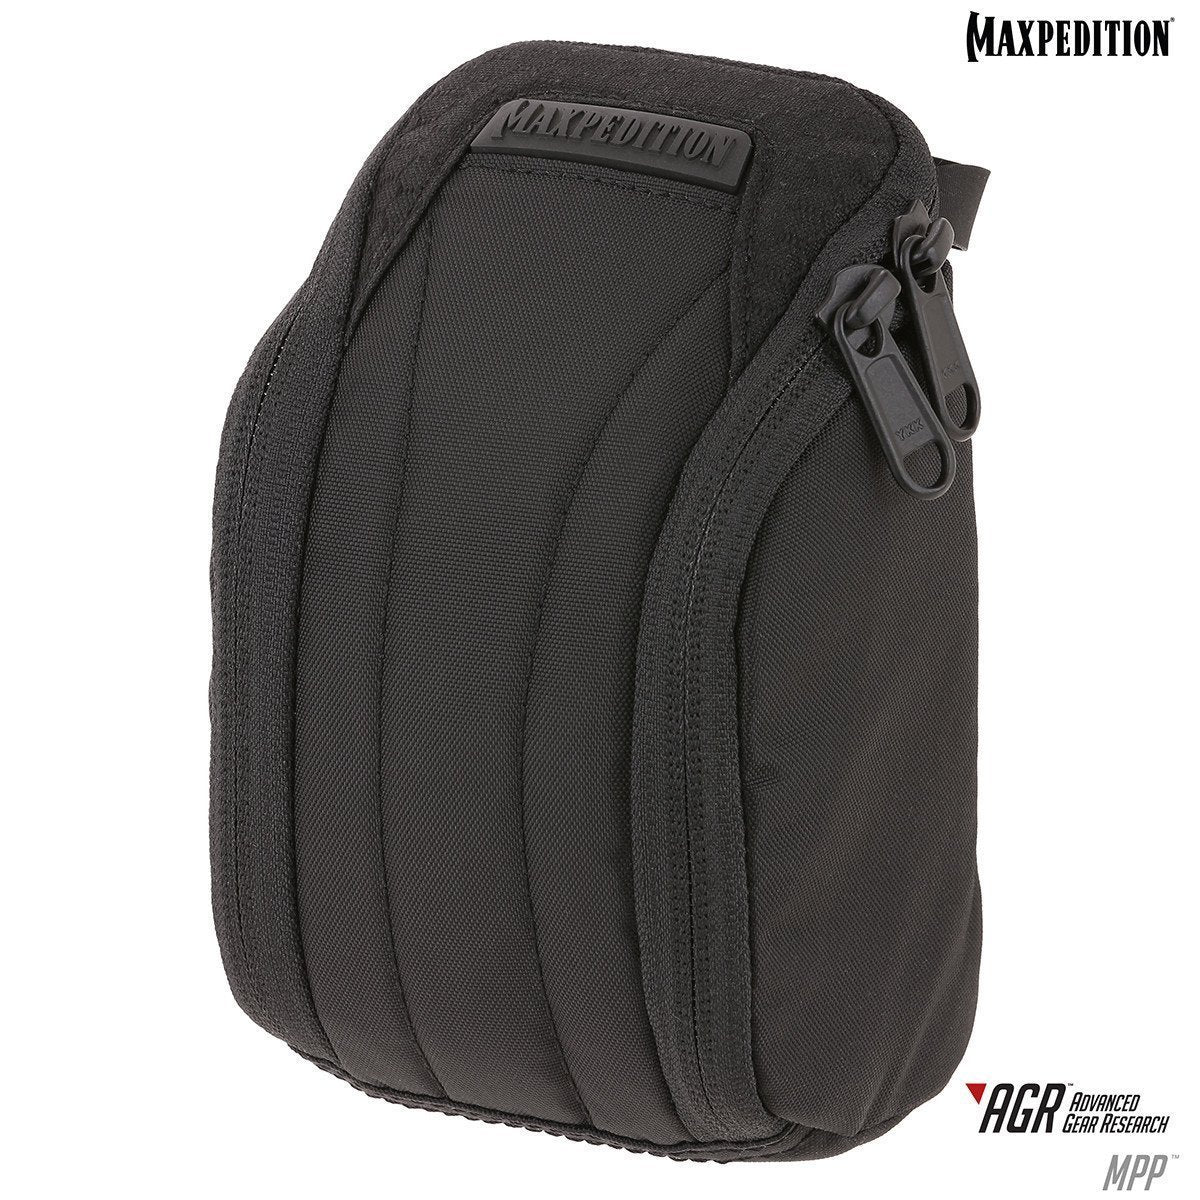 Maxpedition MPP Medium Padded Pouch Accessories Maxpedition Gray Tactical Gear Supplier Tactical Distributors Australia